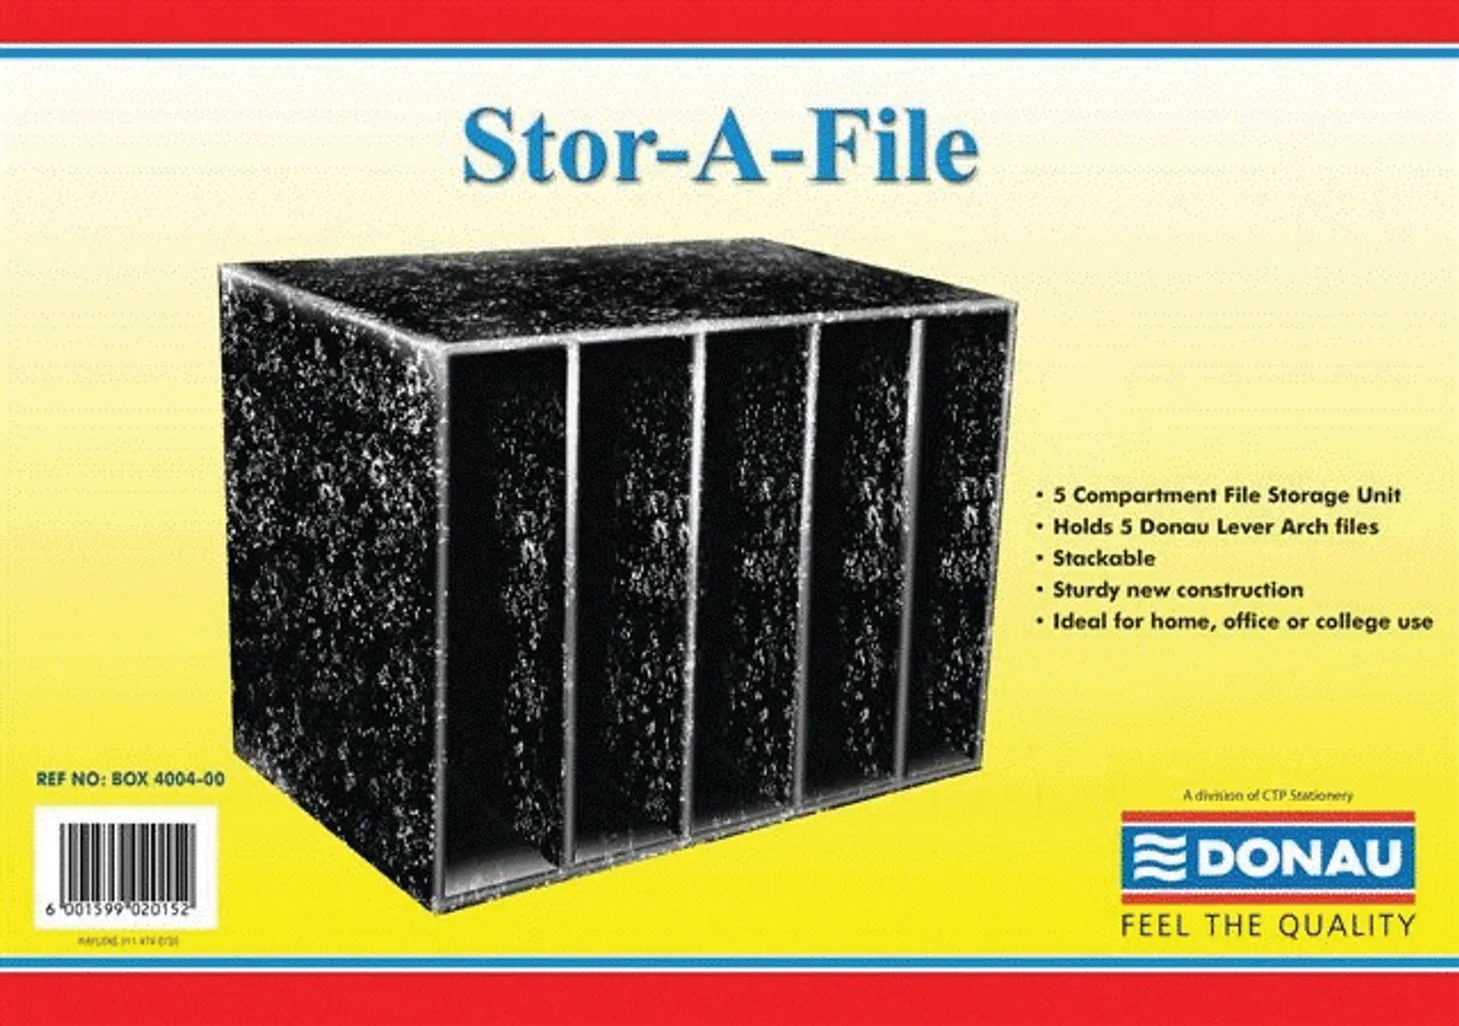 stor-a-file